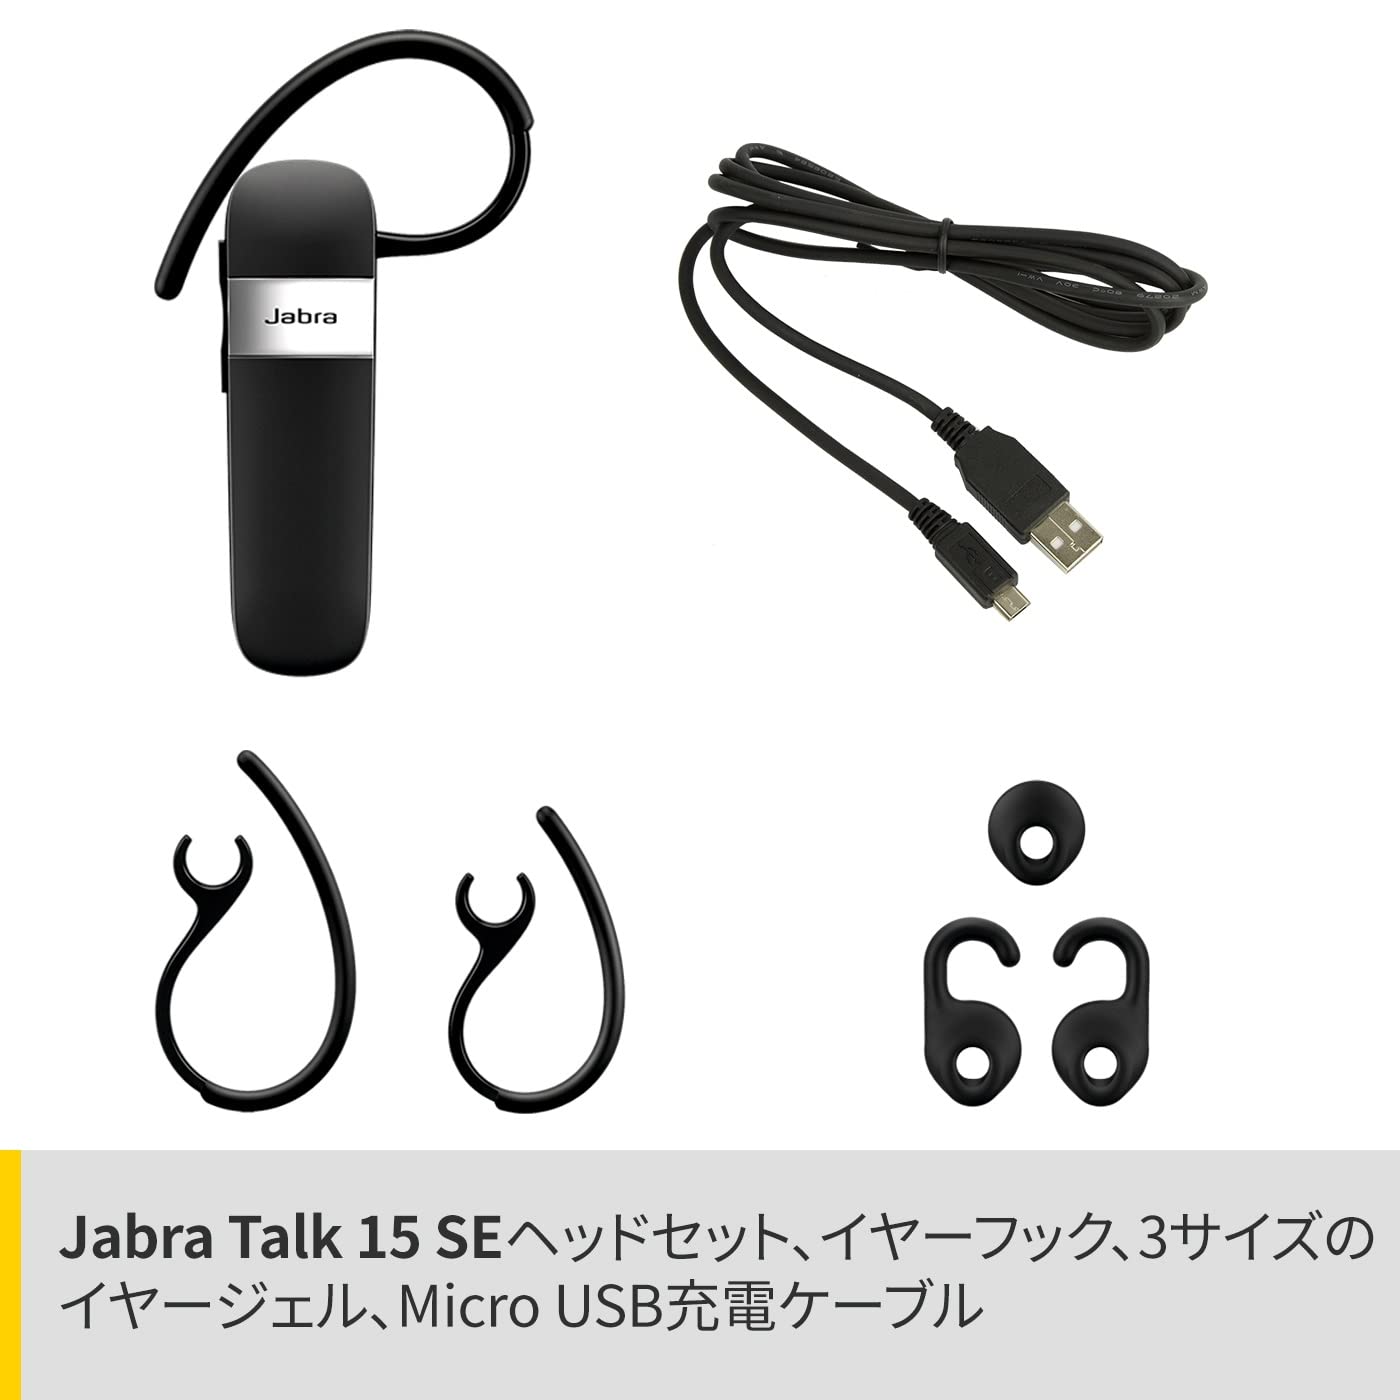 Jabra Talk 15 SE Mono Bluetooth Wireless in Ear Single Earphones with mic, Media Streaming and up to 7 Hours Talk Time - Black